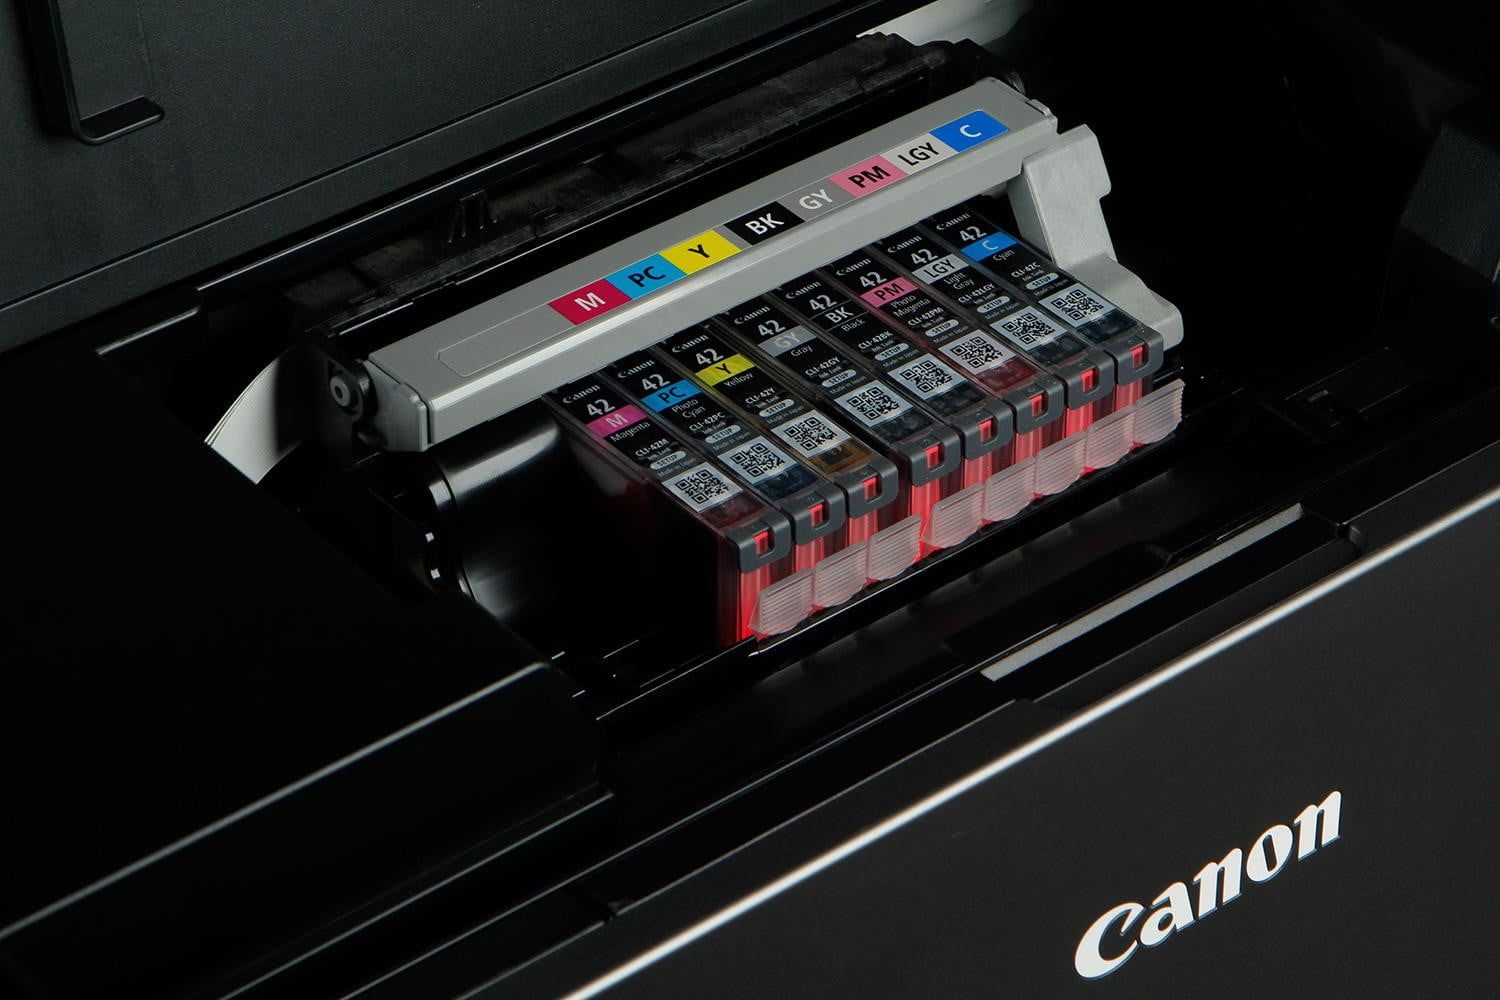 canon printer and scanner software download for mac